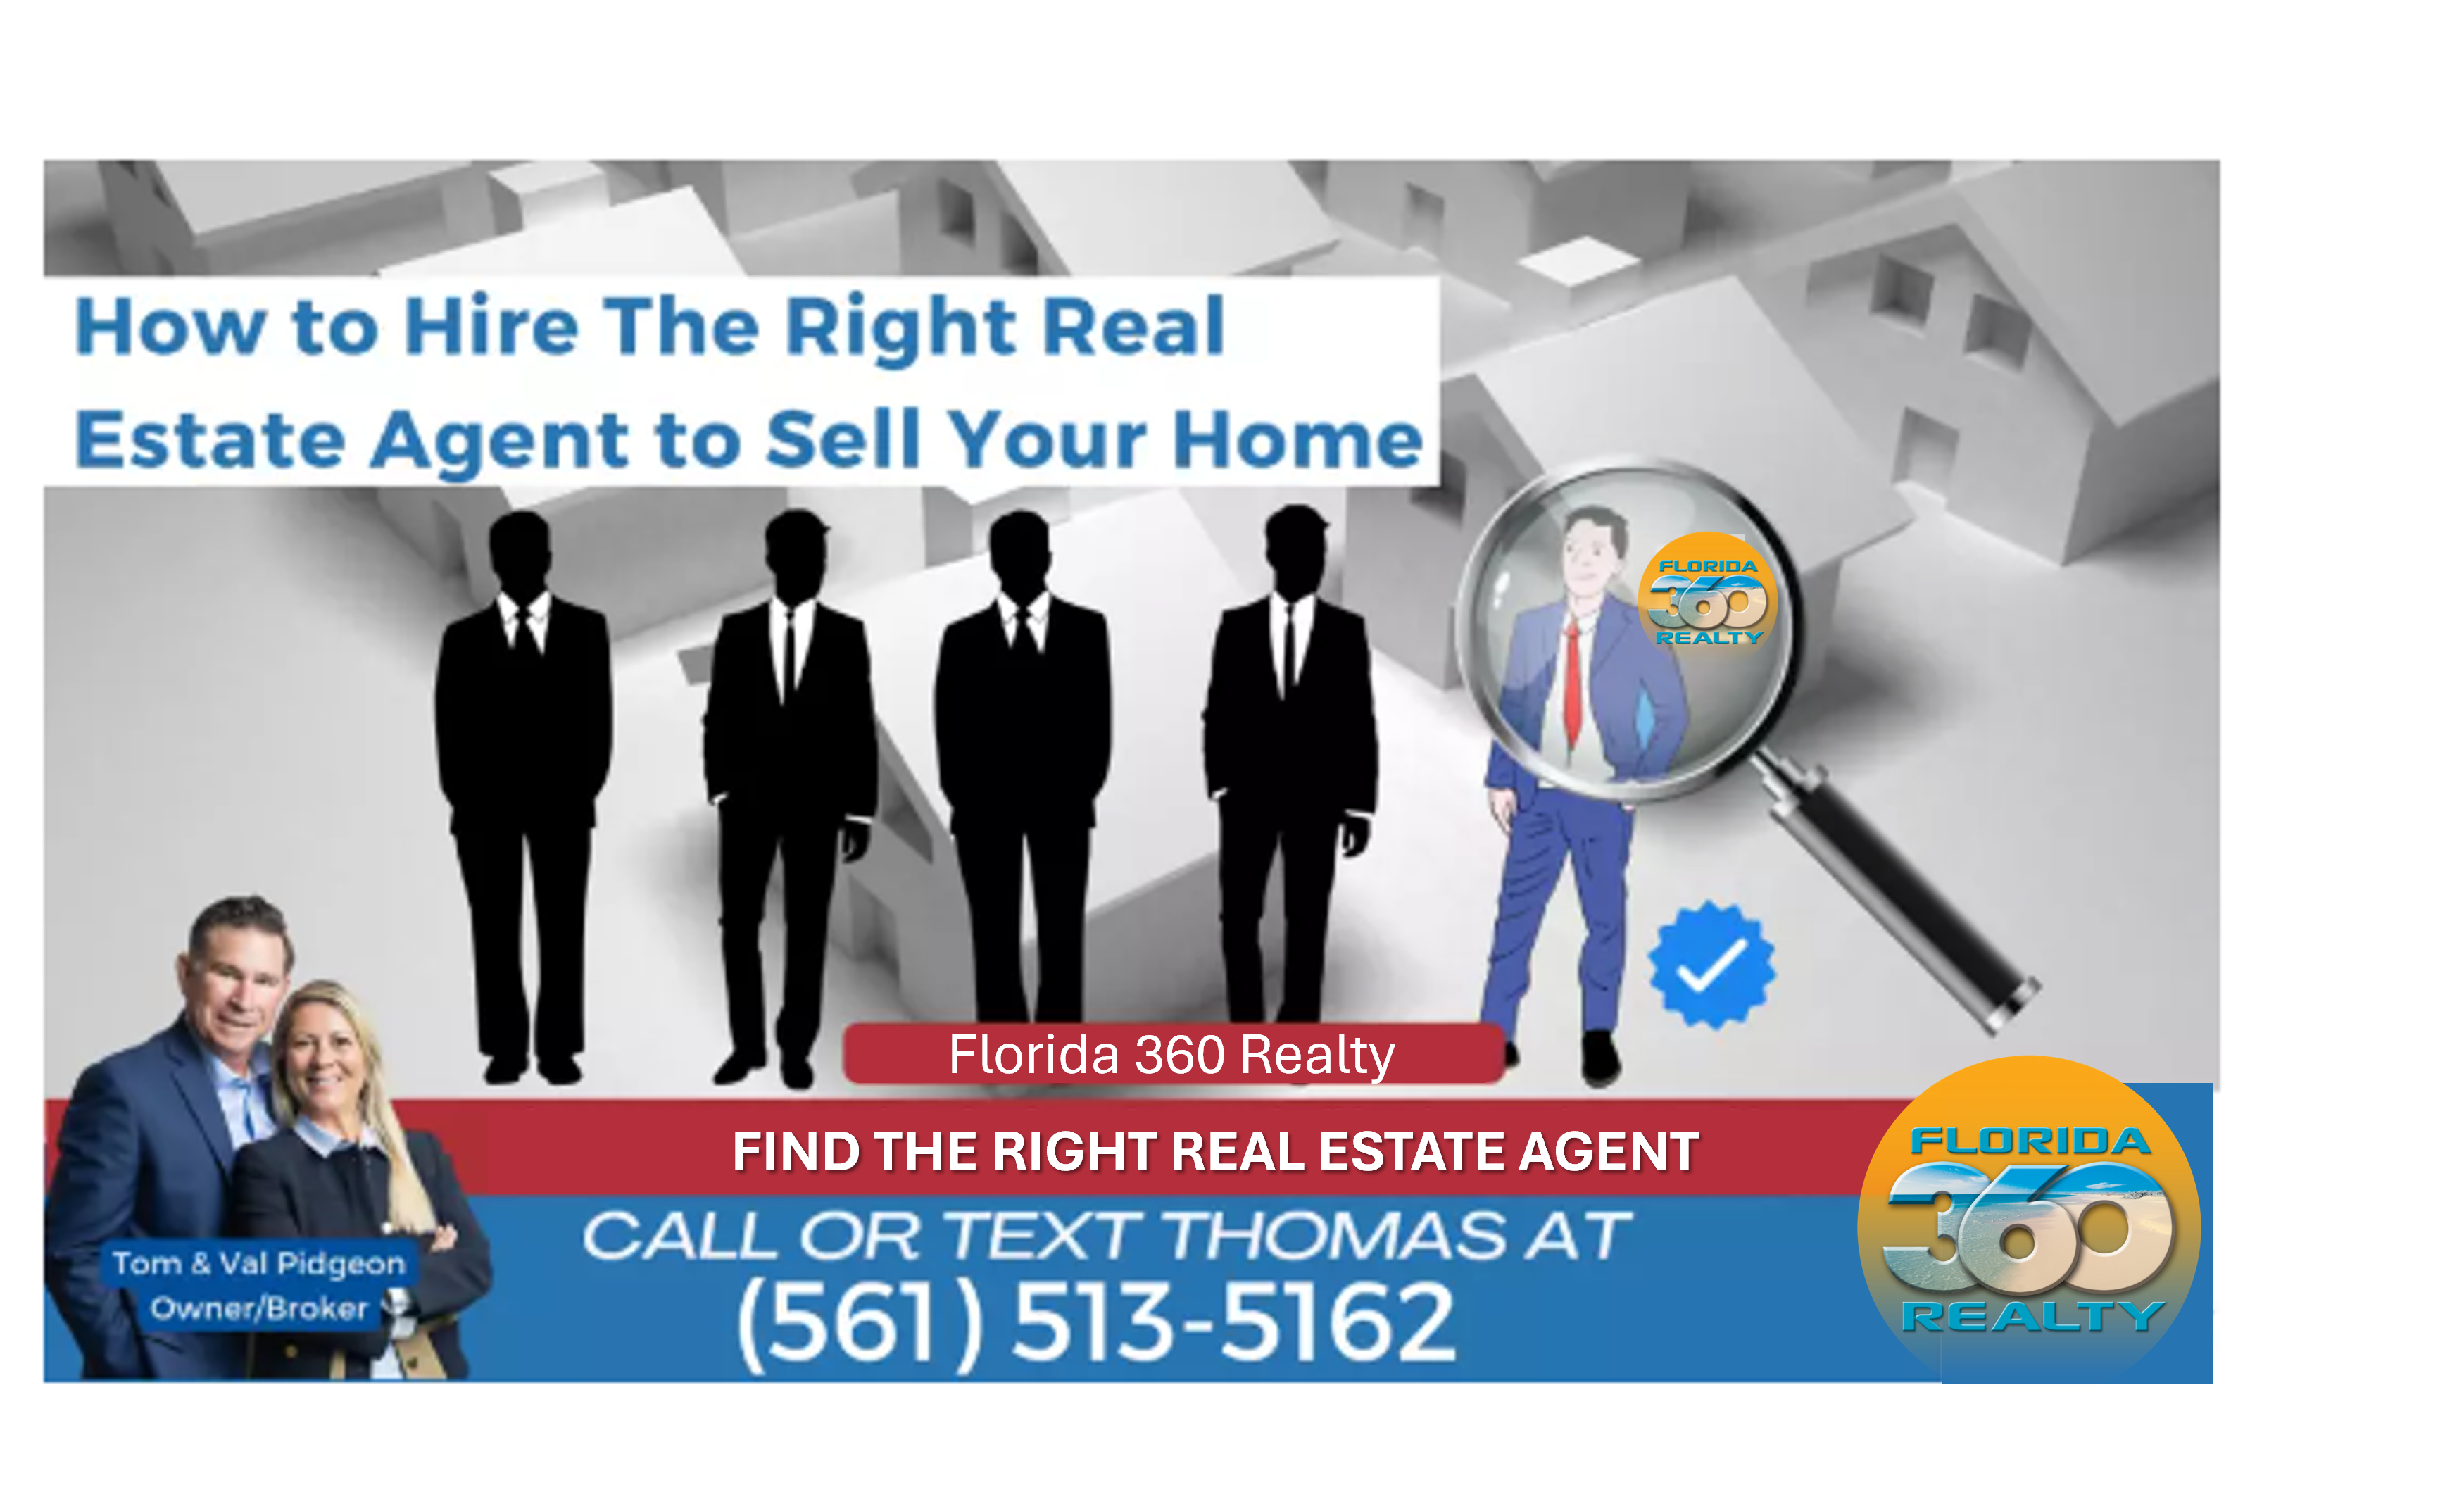 How to Hire The Right Real Estate Agent to Sell Your Home